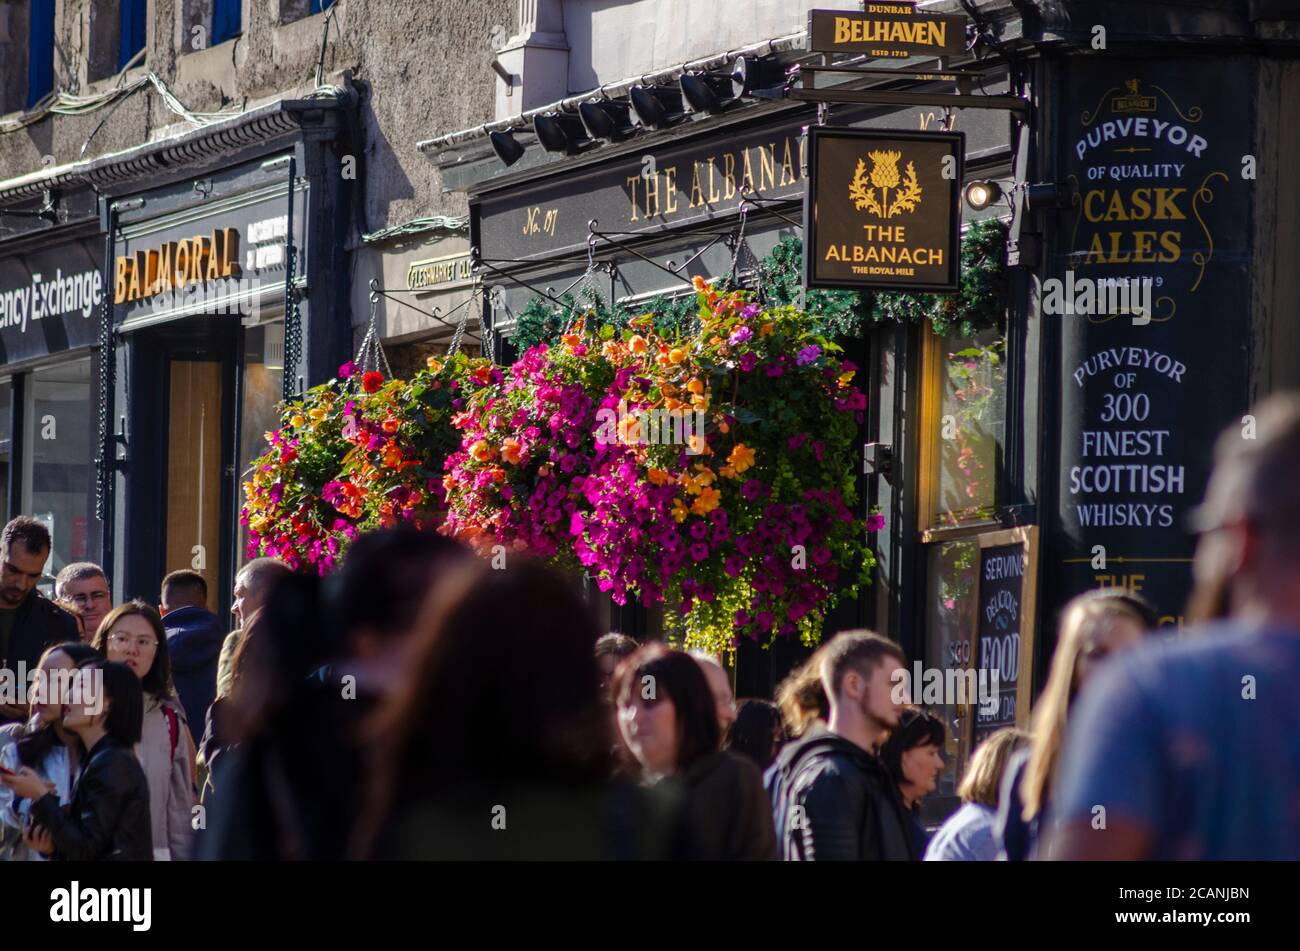 EDINBURGH, SCOTLAND, UK - 13 September 2019 - Tourists and locals milling about outside The Albanach public house in the Royal Mile of the Old Town of Stock Photo